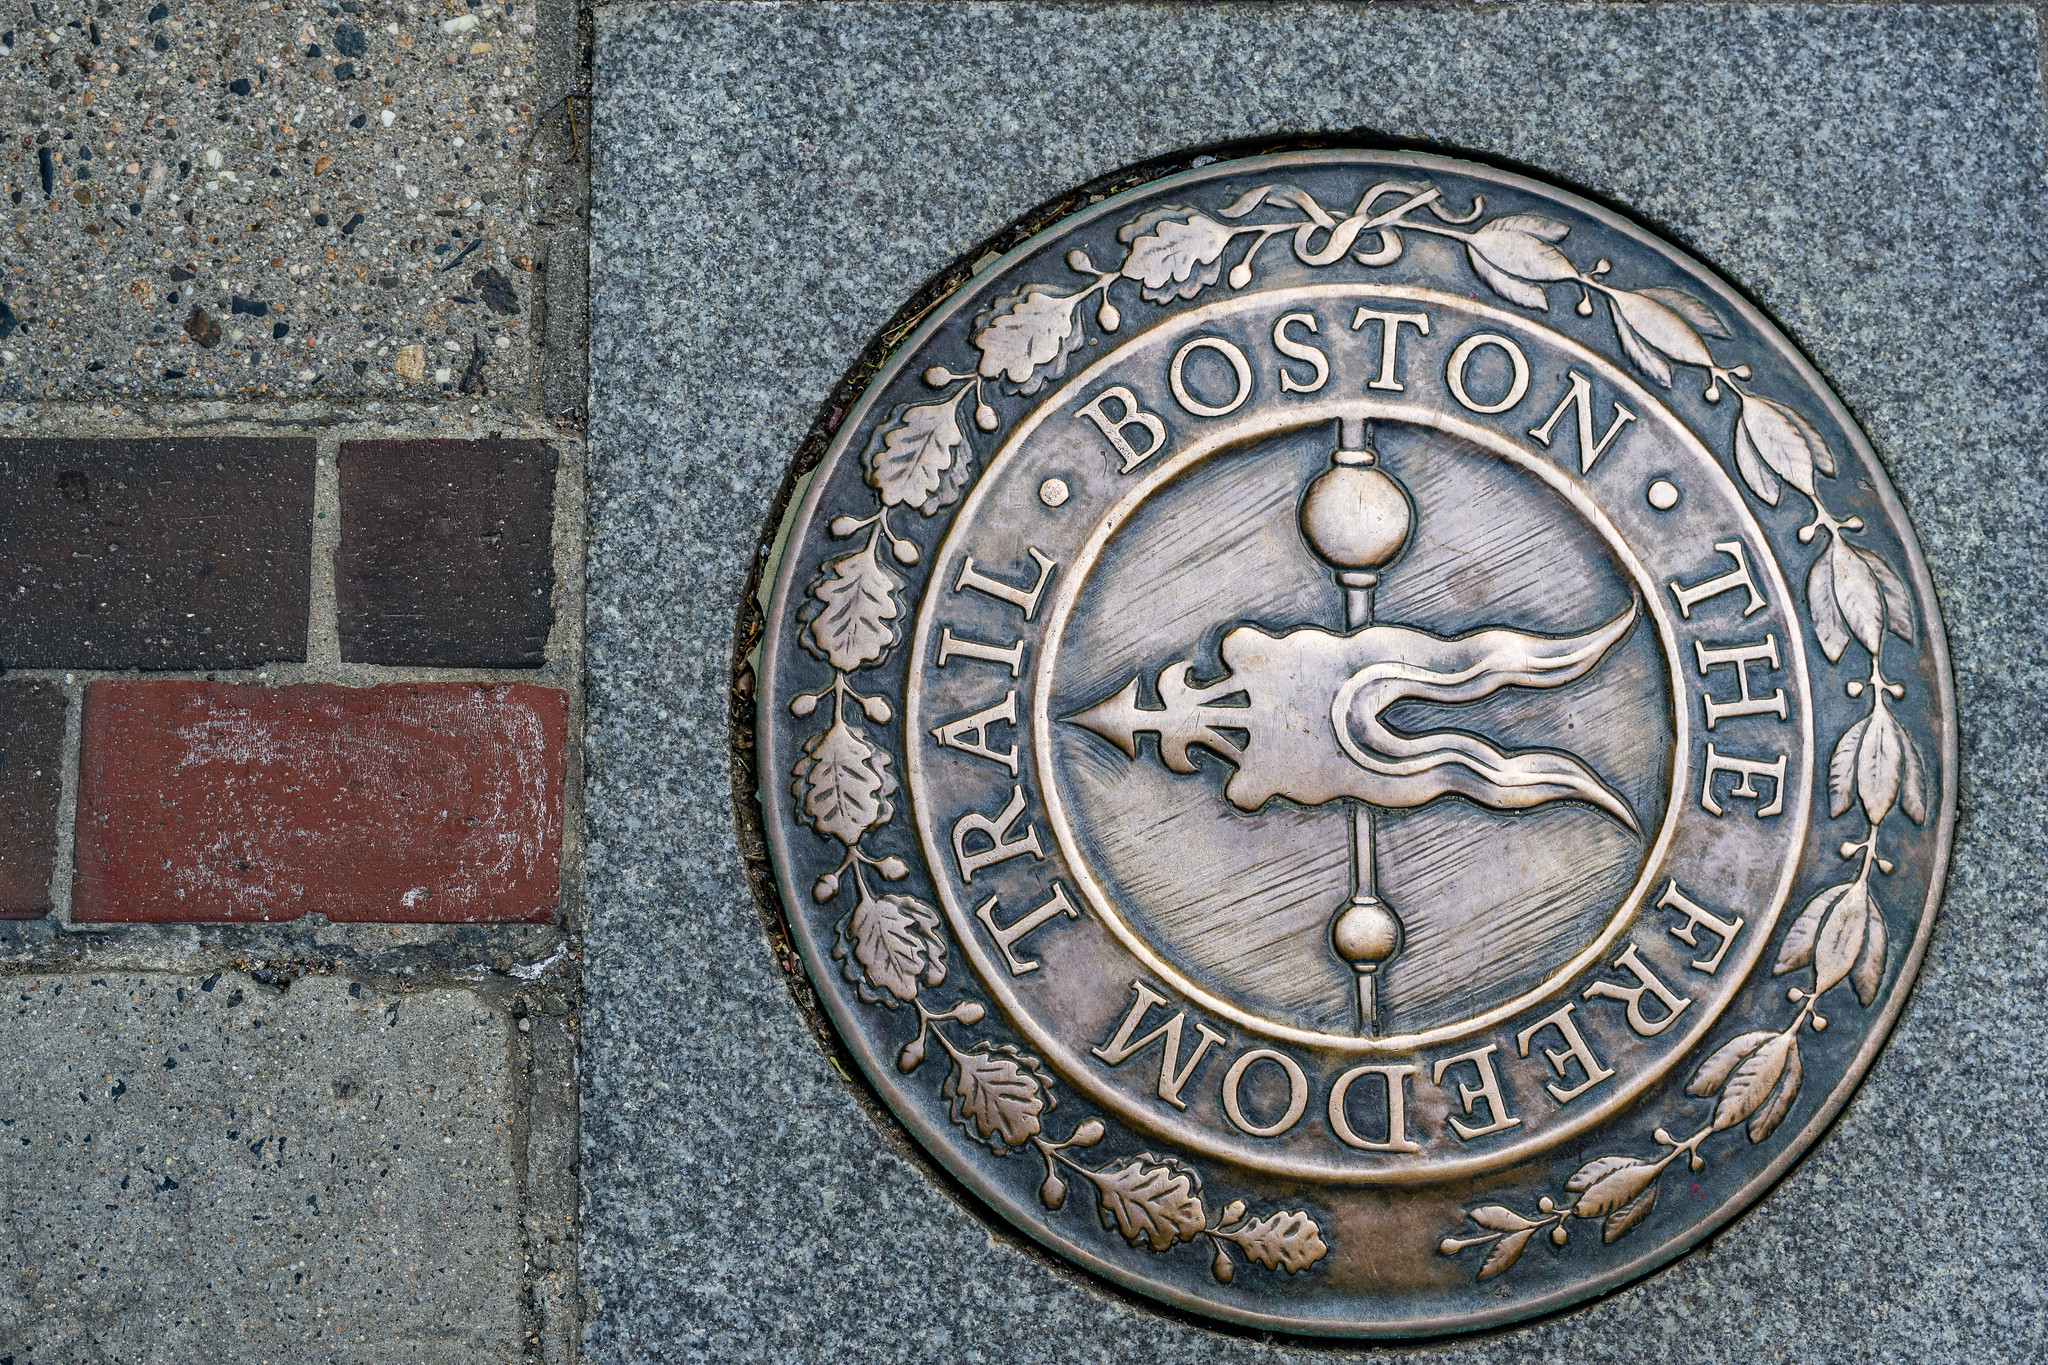 Marker for The Freedom Trail, in Boston, MA.